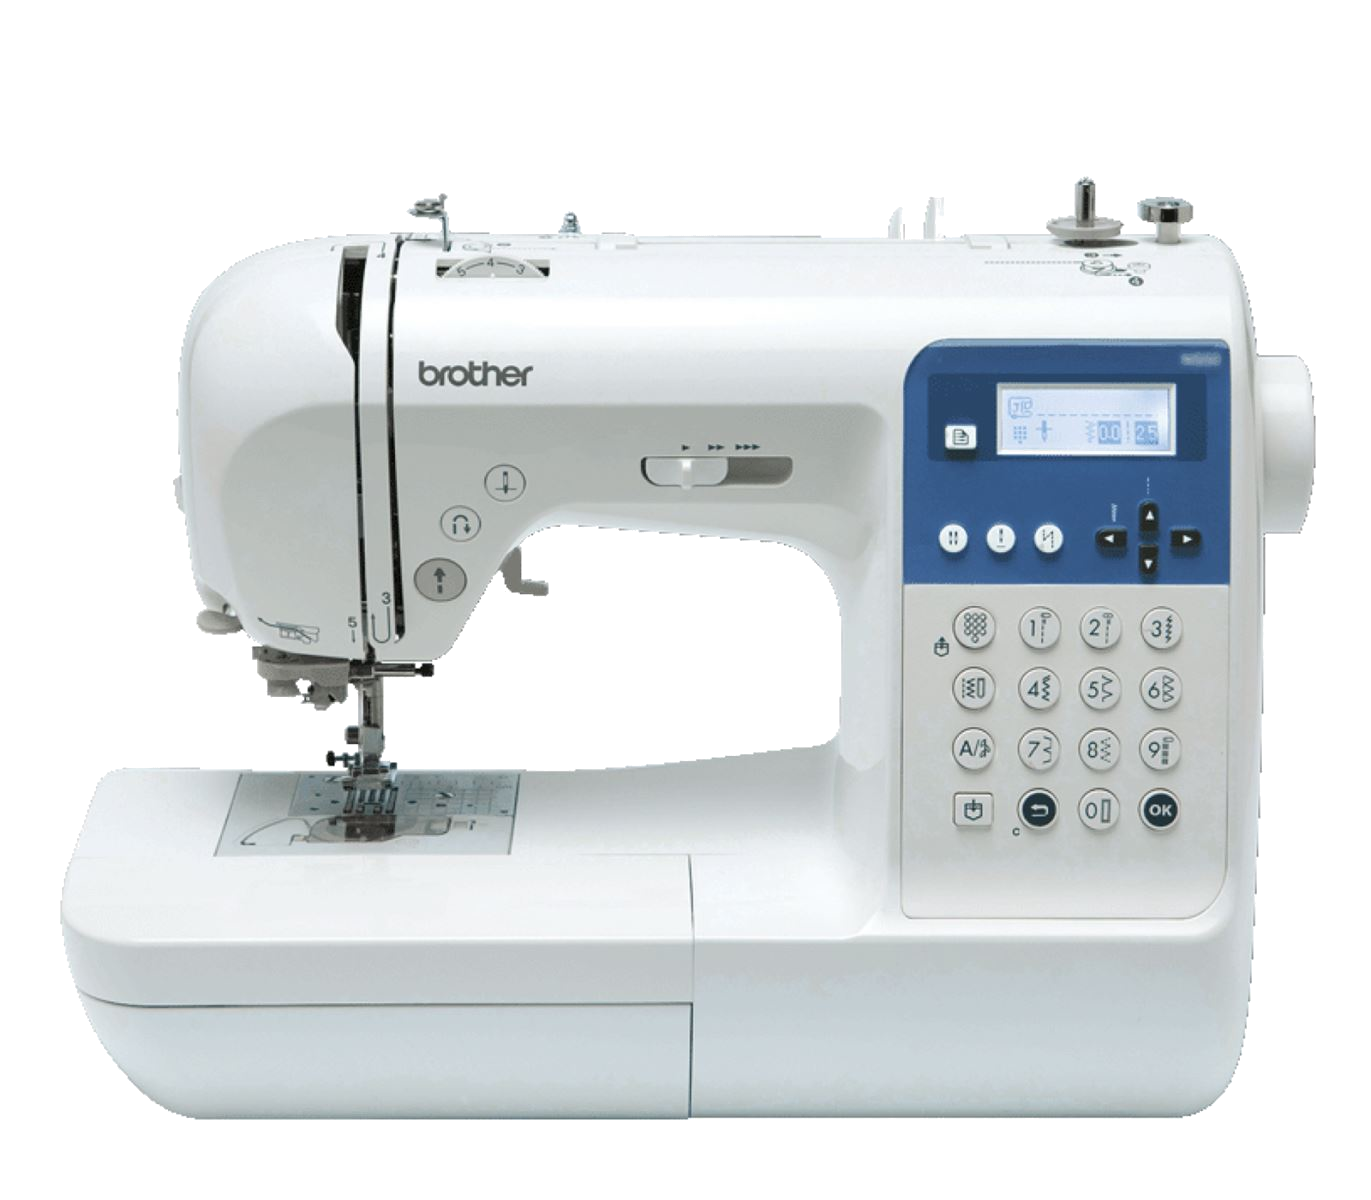 A photo of the Brother NS50 sewing machine